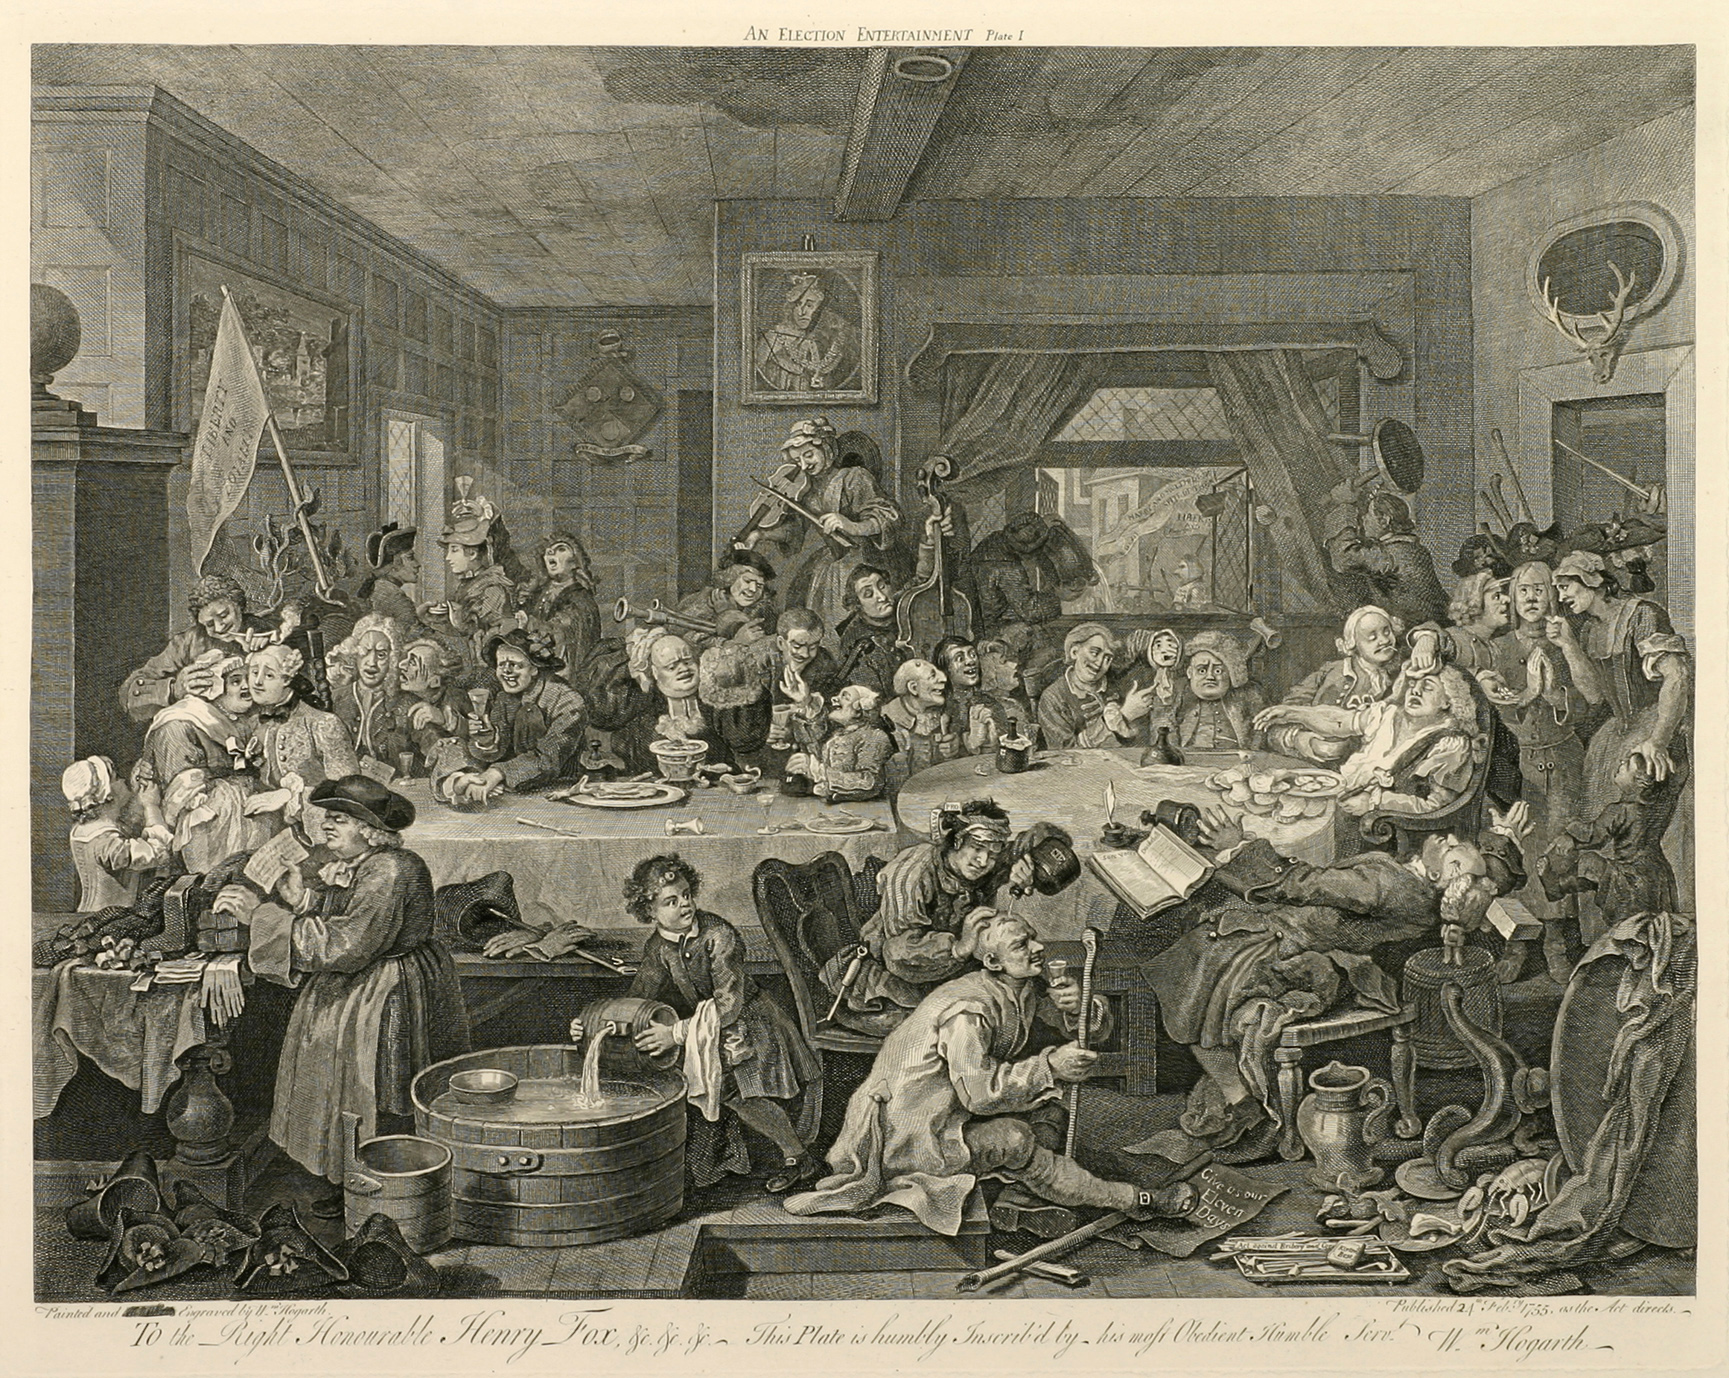 ELECTION- An Election Entertainment, - Antique Print from 1805